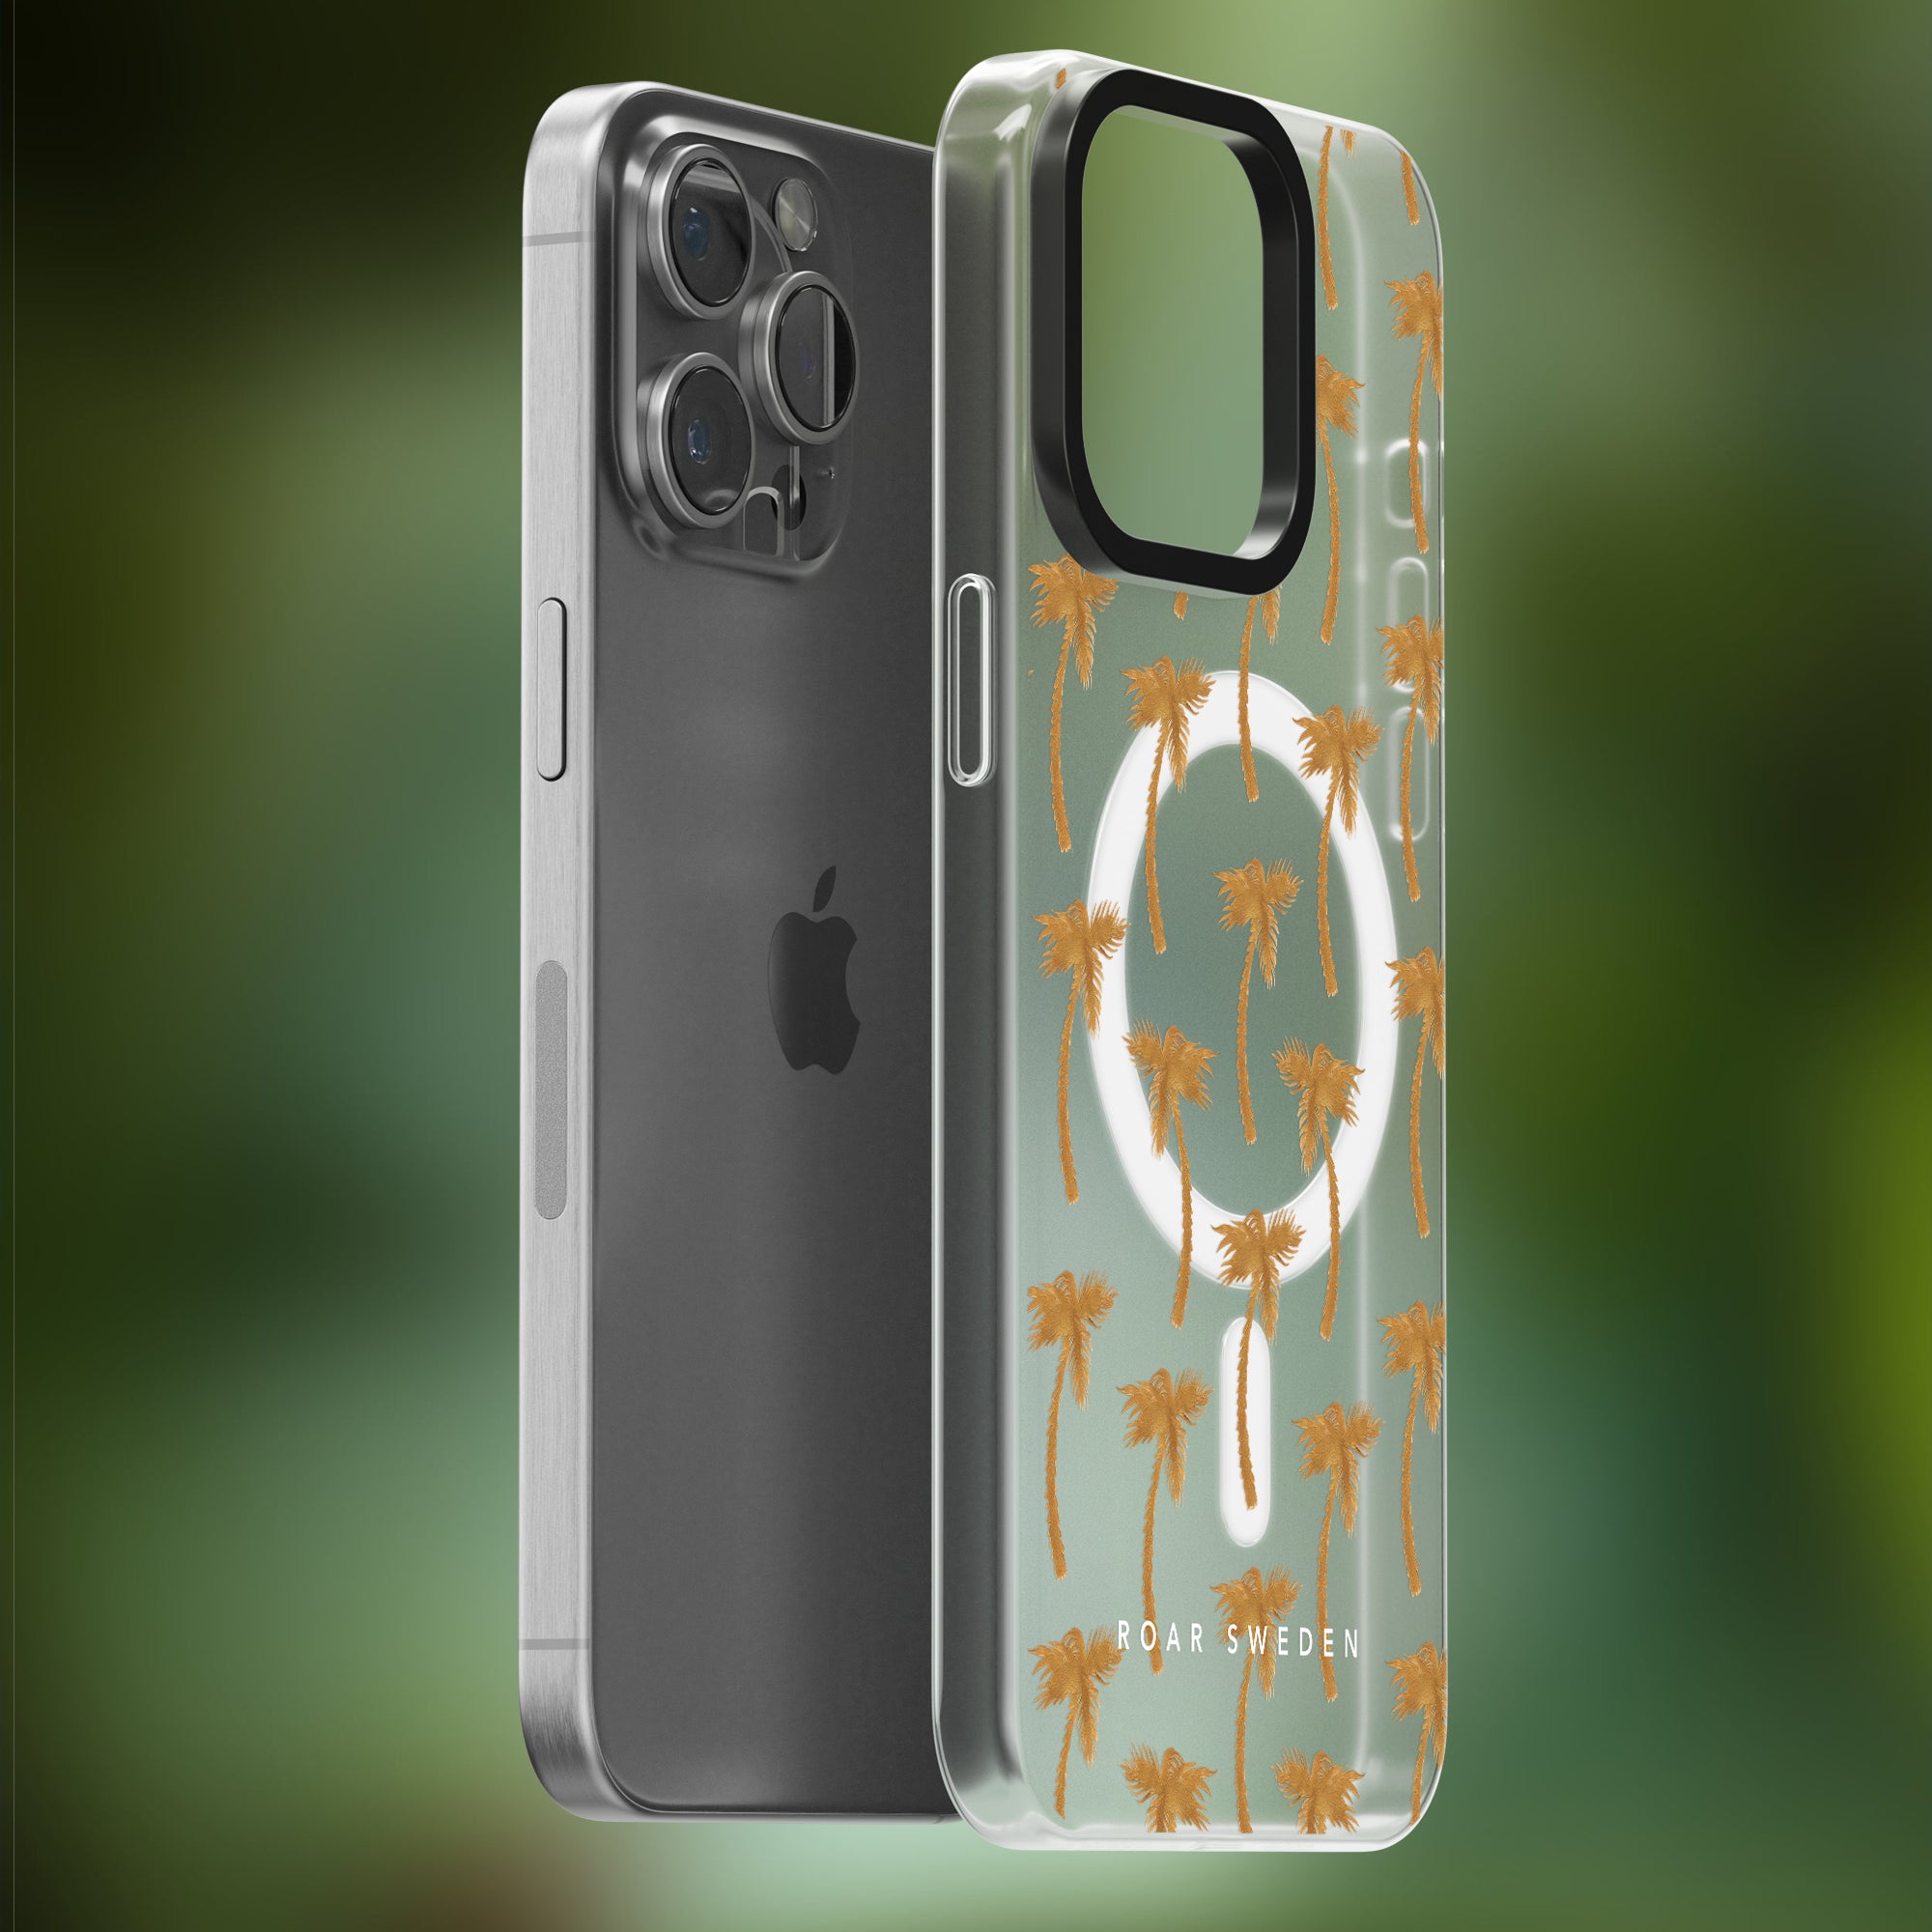 A smartphone with a transparent, decorated case from the Jungle Collection featuring orange palm trees and a white magnifying glass icon, displaying the words "Golden Palms - MagSafe" at the bottom.